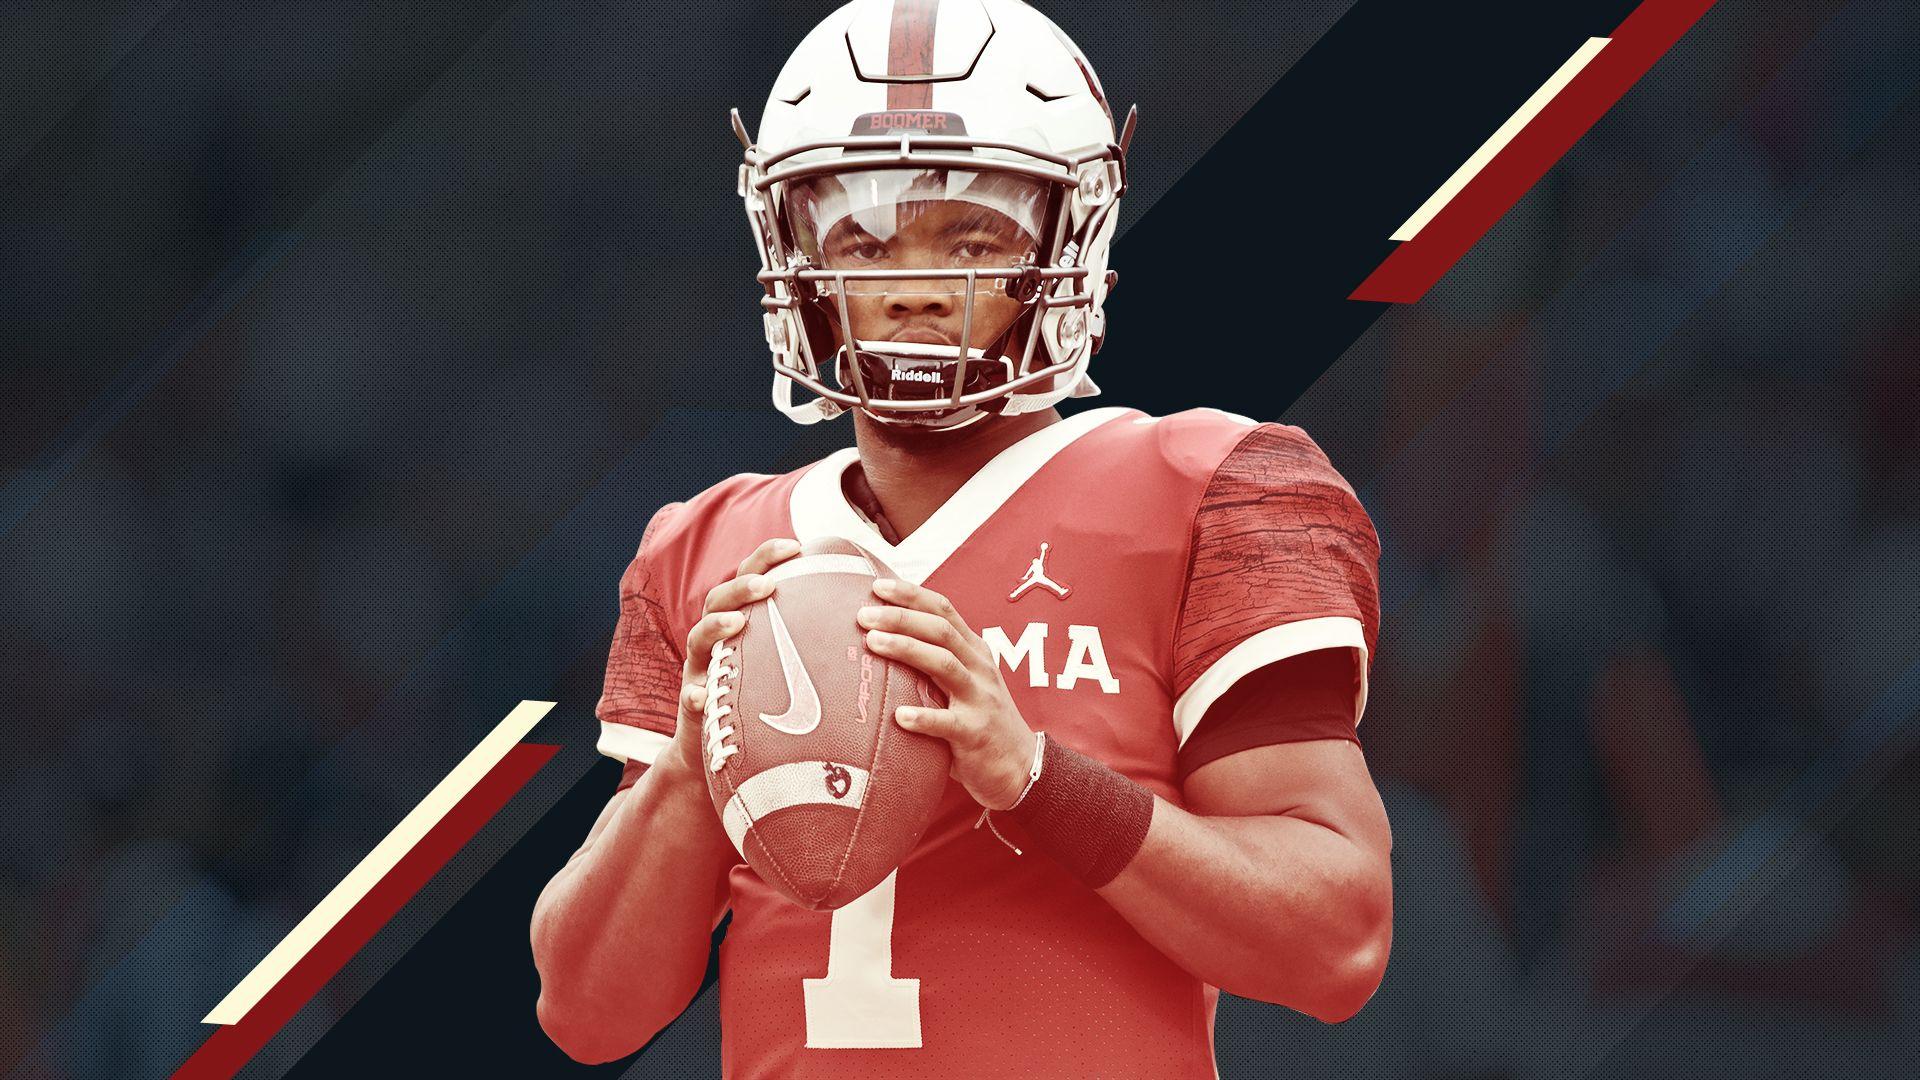 Driven to success: How Kyler Murray took winding path to greatness